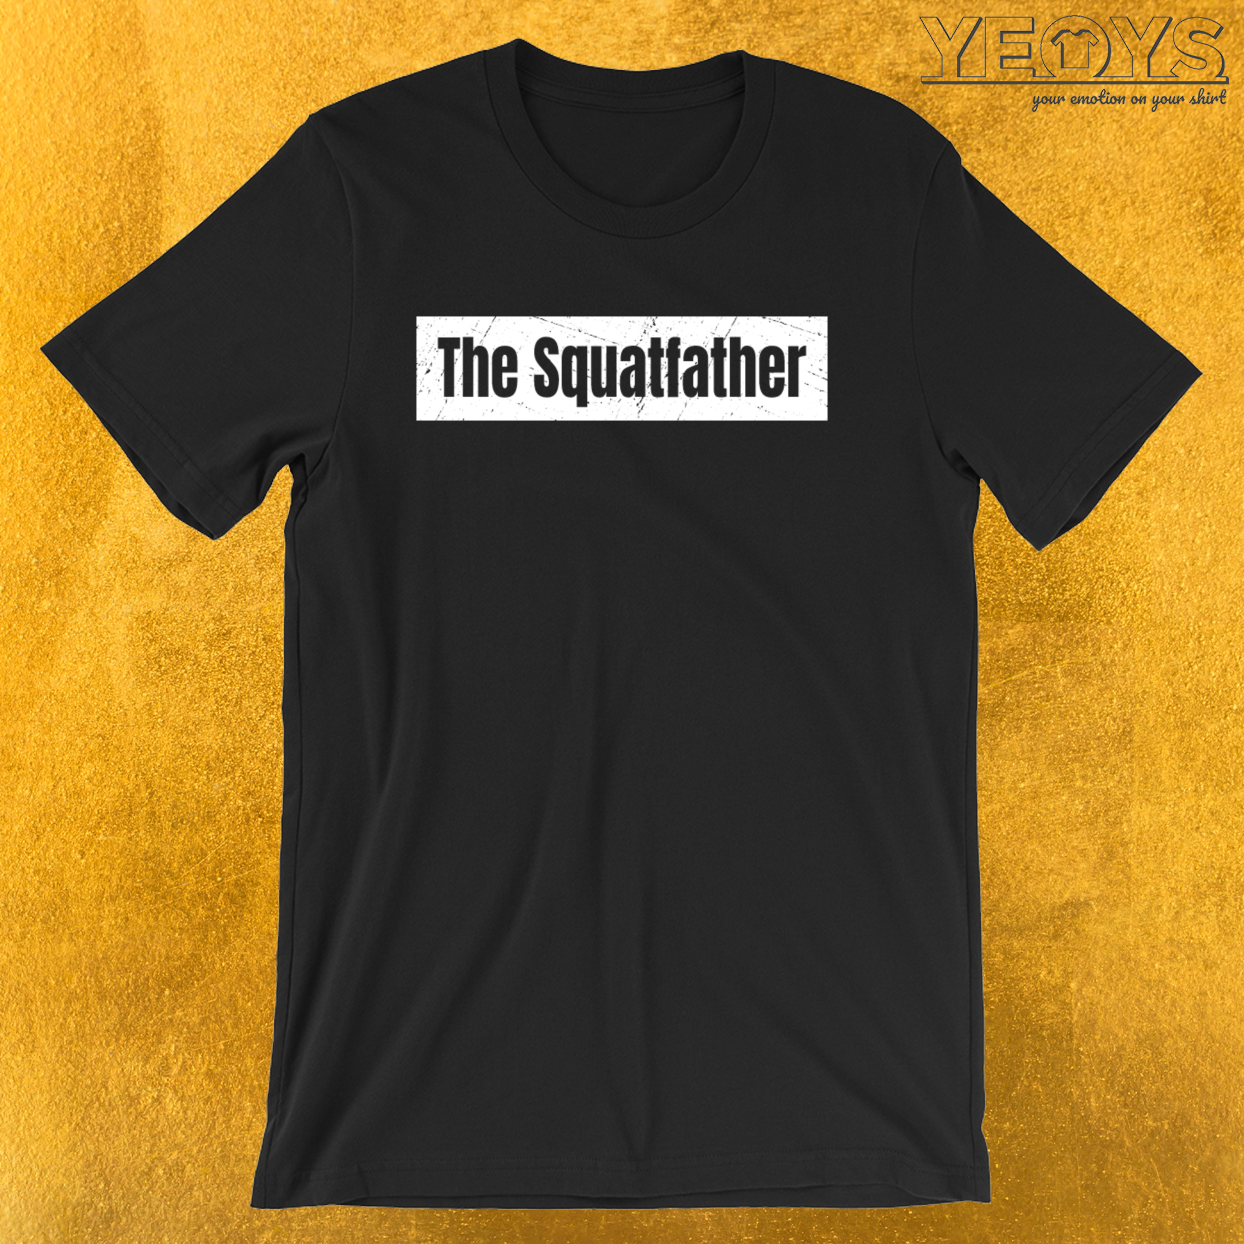 The Squatfather – Squating Tee